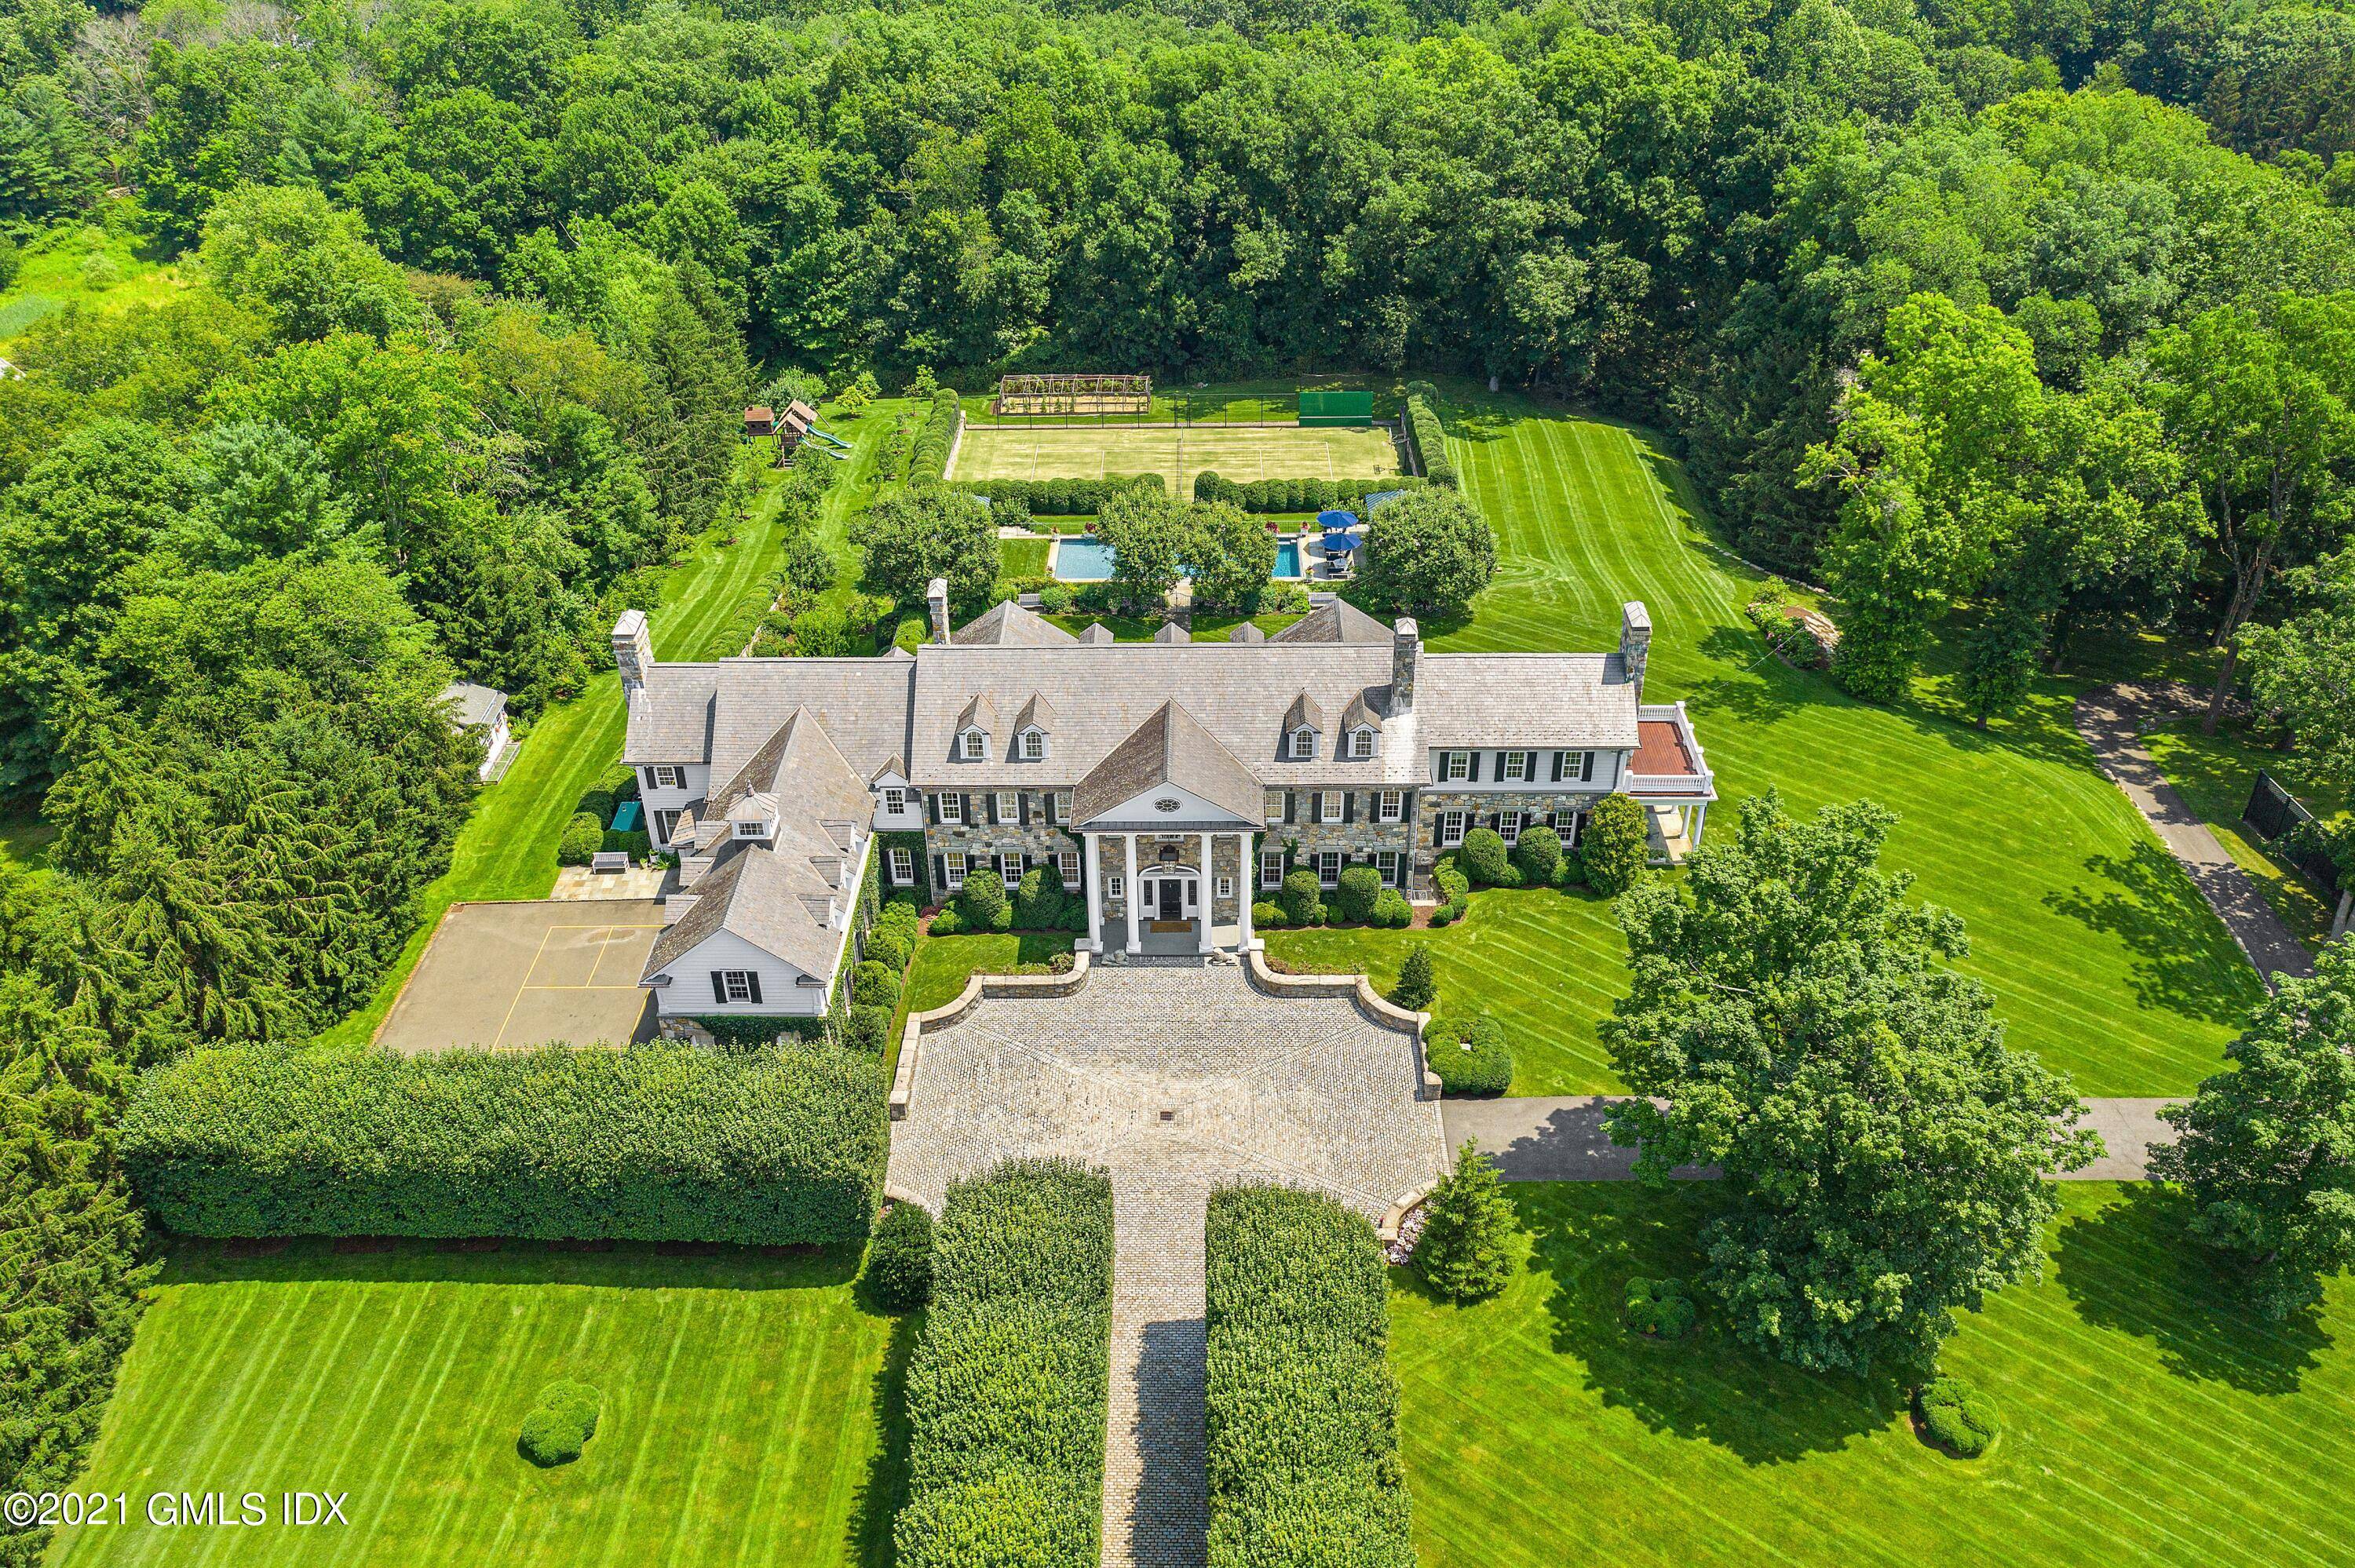 STONEHILL, an Iconic Greenwich compound offers an unparalleled sophisticated lifestyle.